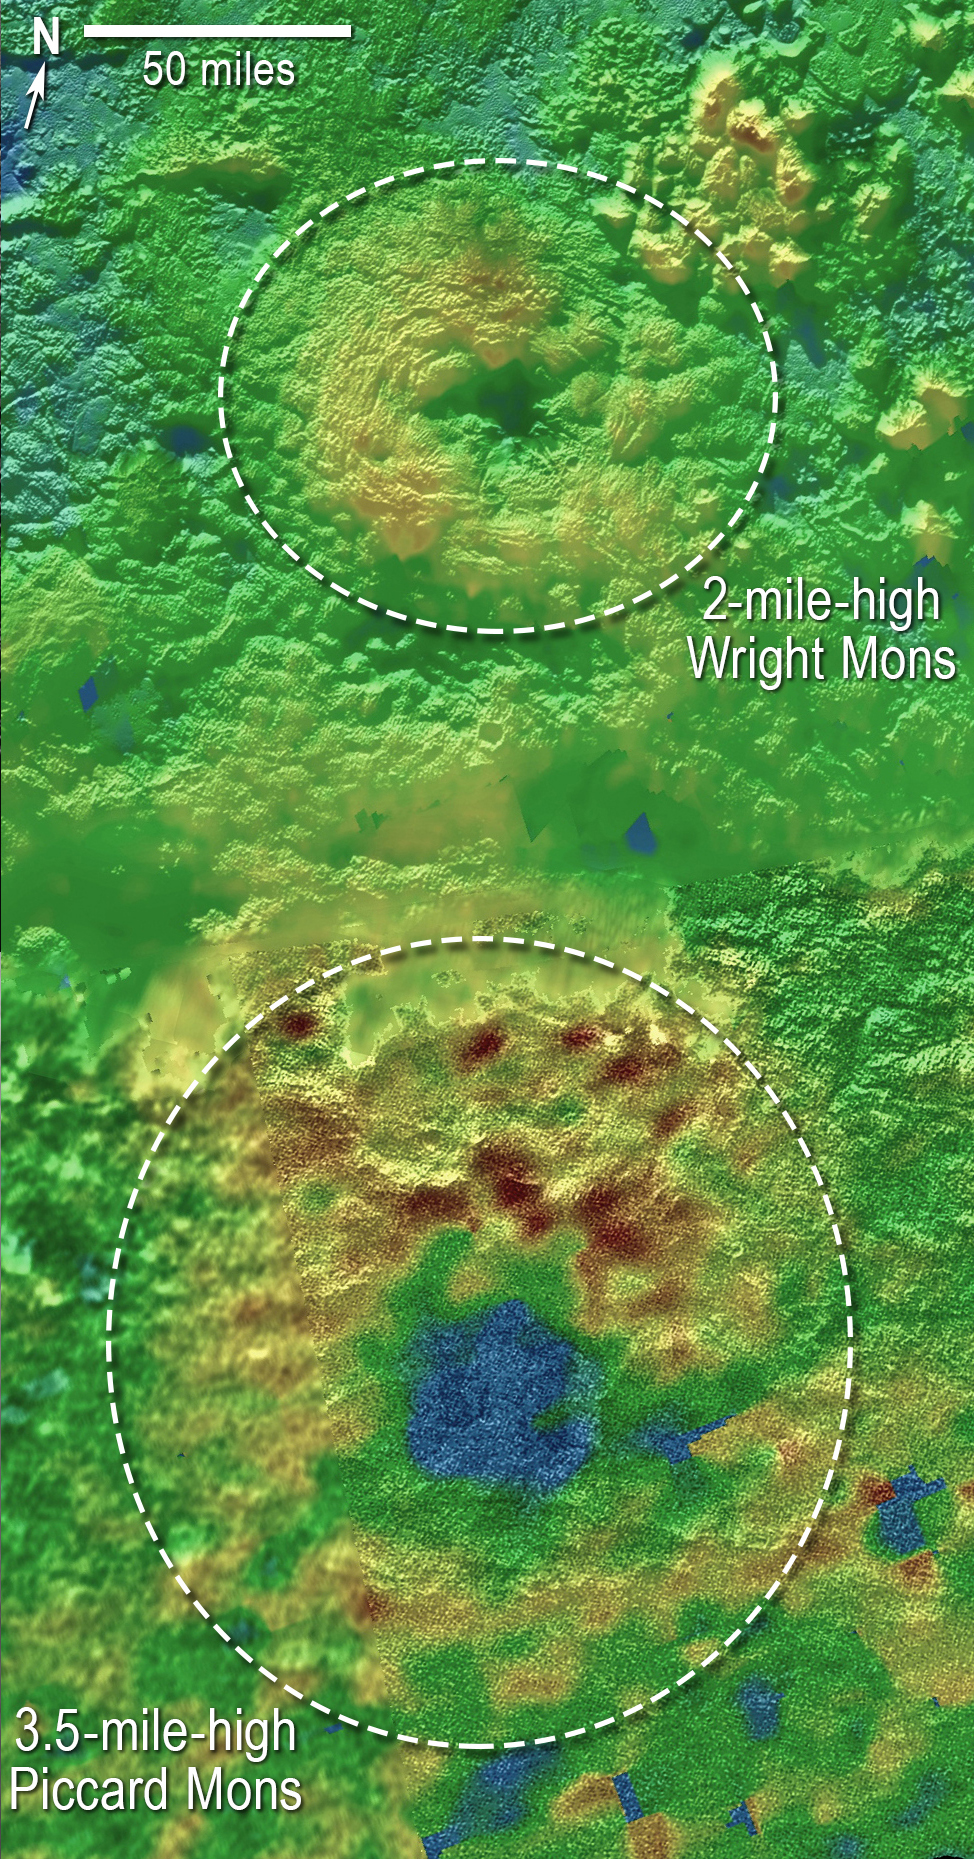 A coloured topographical map with two volcano-like features circled in white